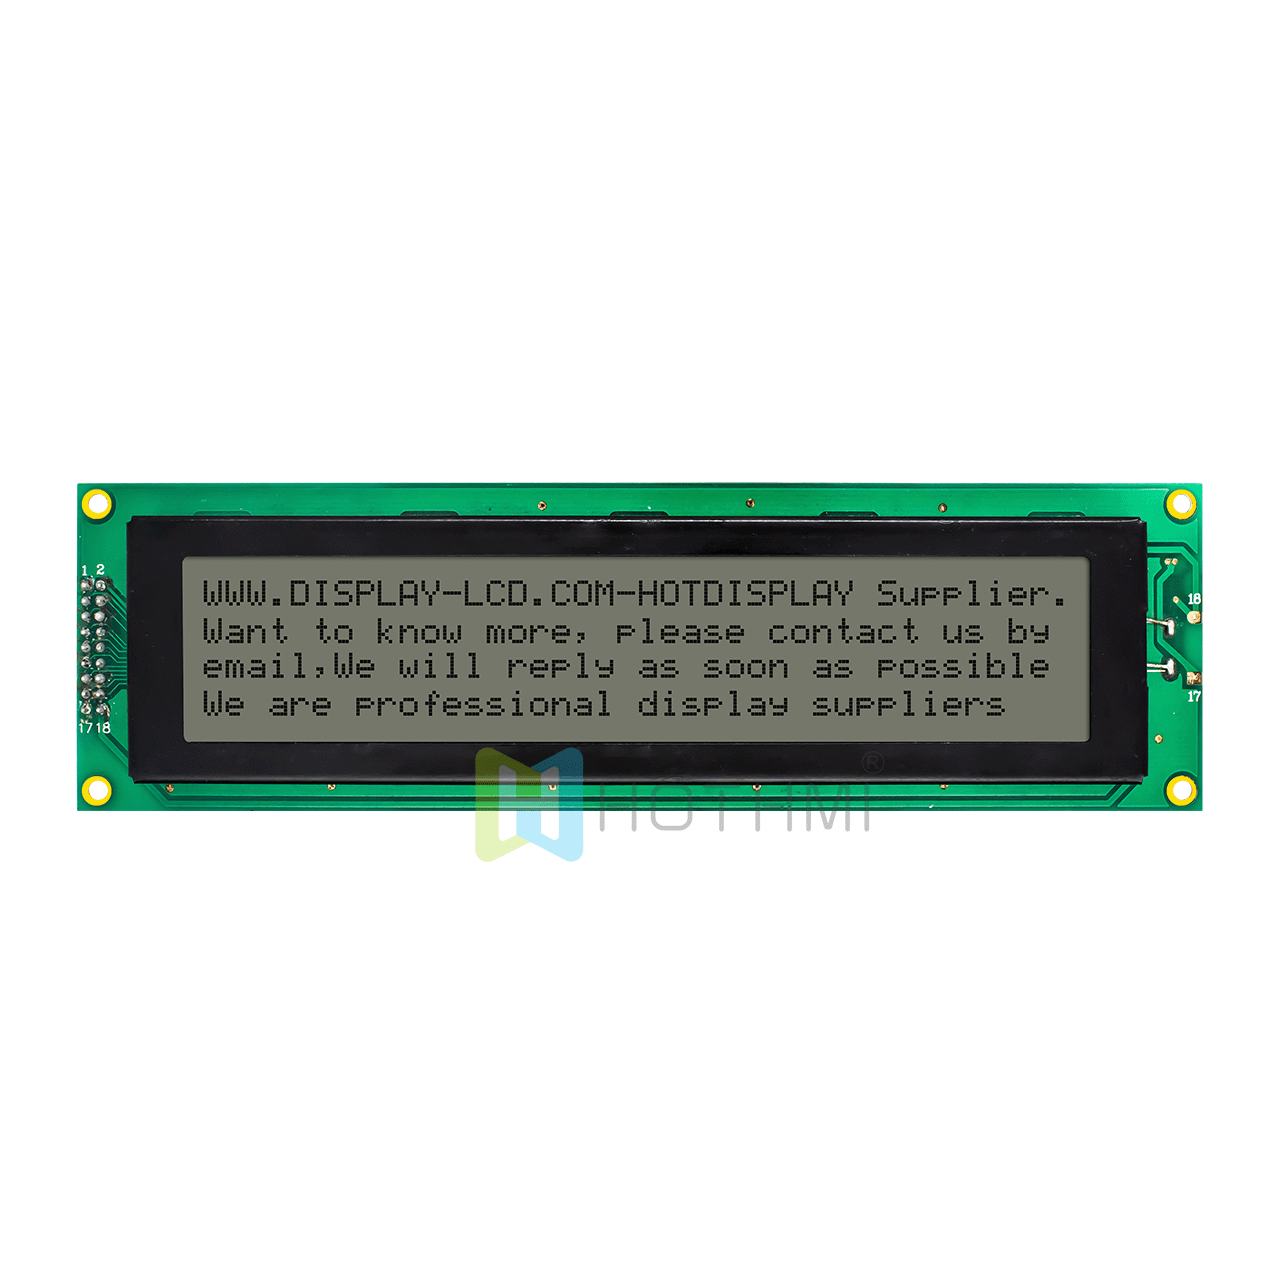 5.0v | 4X40 Character LCD | FSTN Positive Display | With White Backlight | Arduino Display | ST7066U | Transflective Display